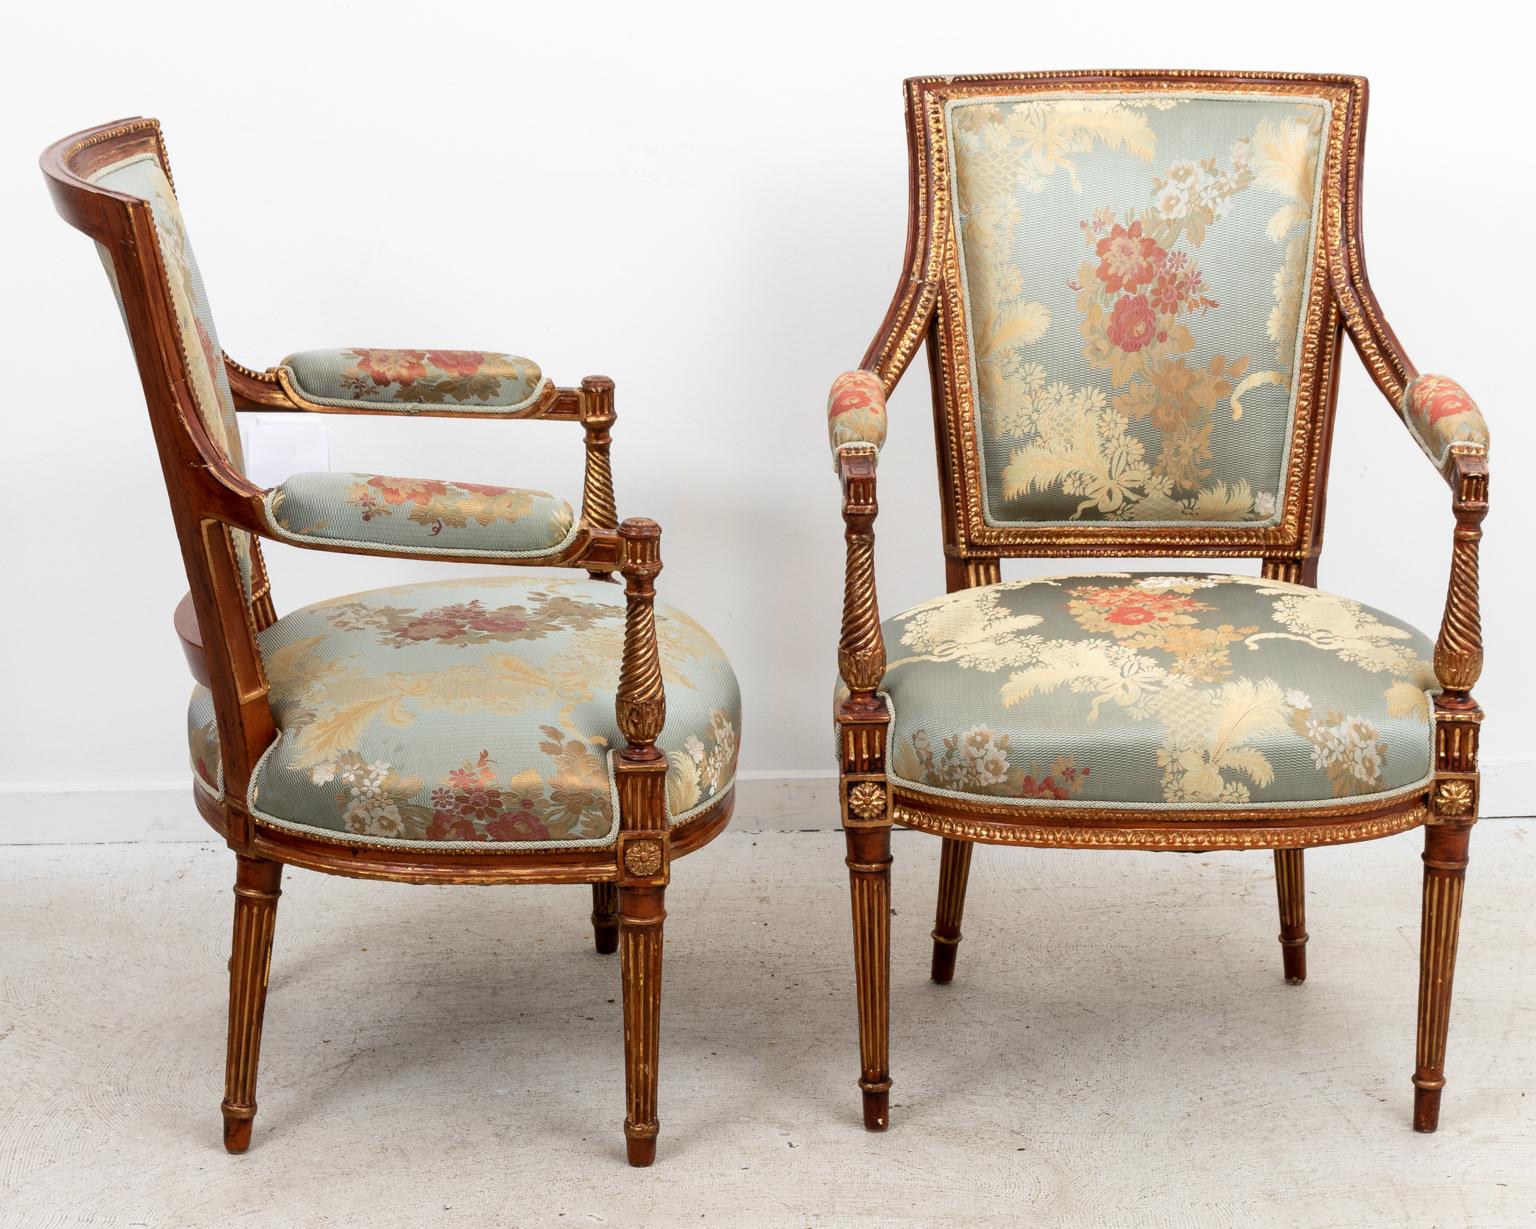 Pair of French upholstered open armchairs with rectangular backs and upholstered armrests. Please note of wear consistent with age including chips, wood loss, and finish loss.